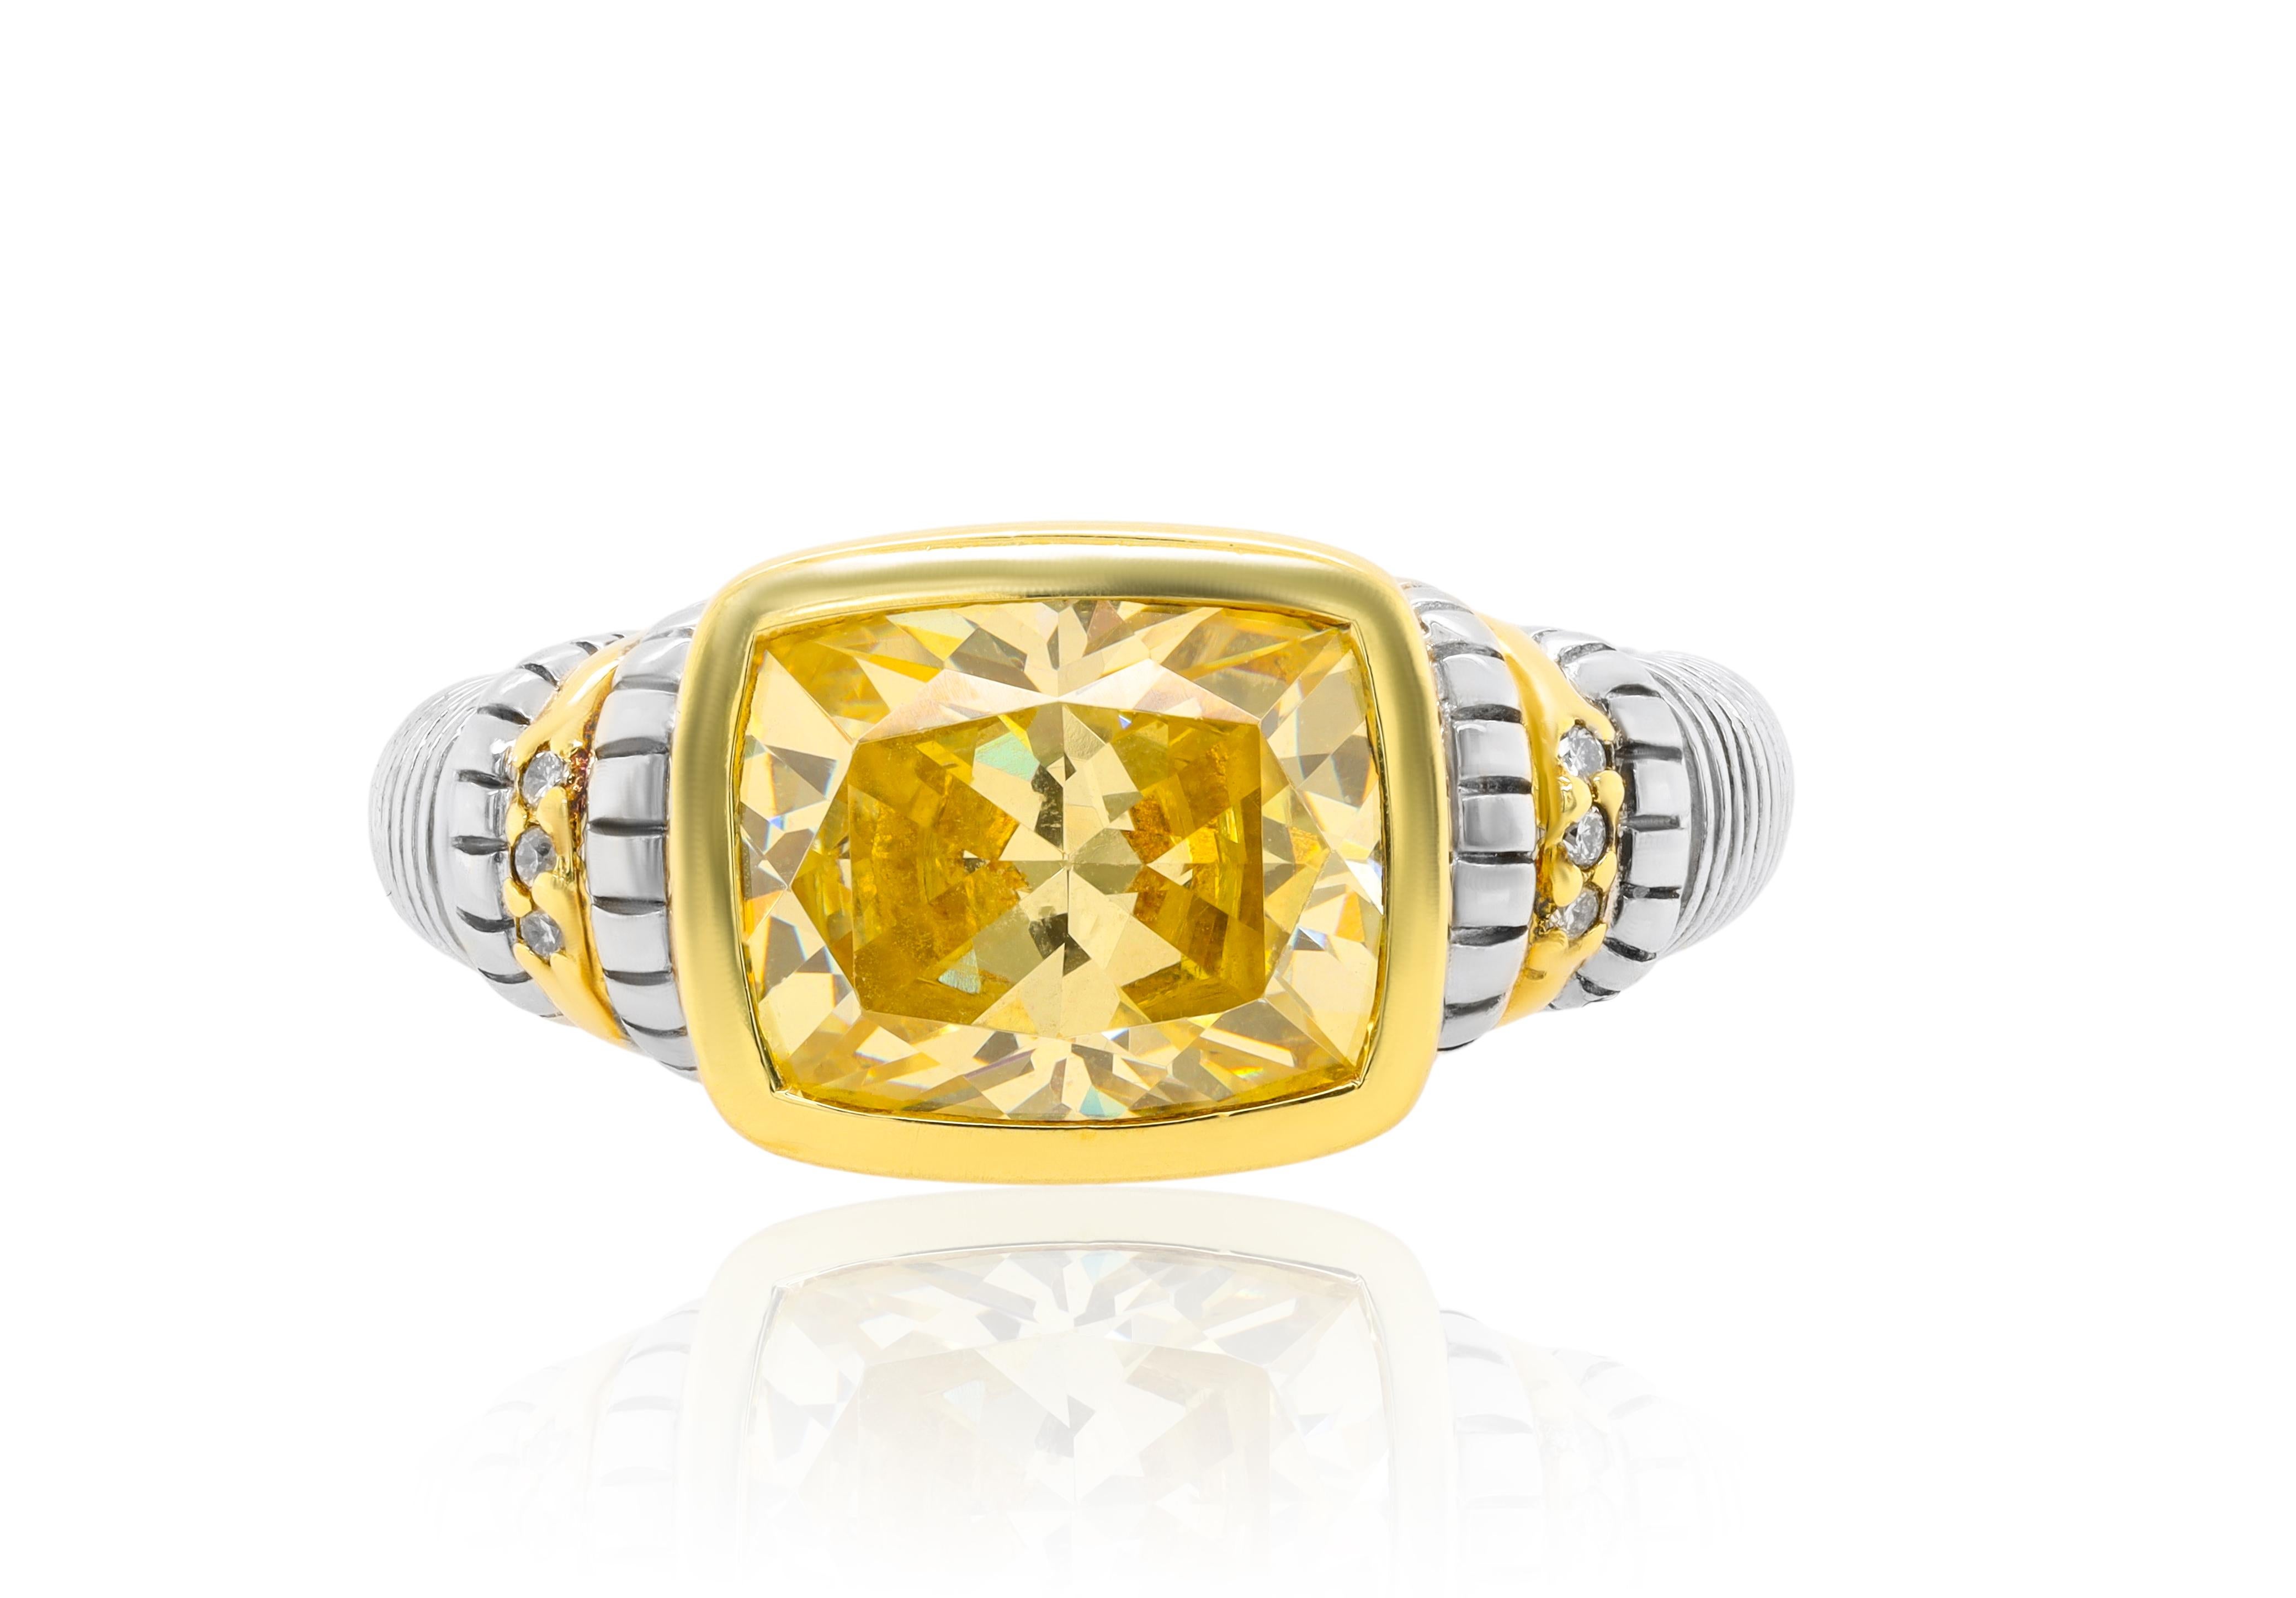 Silver and 18 kt yellow gold Judith Ripka style citrine ring with a 4.25 ct citrine center in a bezel set.
Diana M. is a leading supplier of top-quality fine jewelry for over 35 years.
Diana M is one-stop shop for all your jewelry shopping, carrying